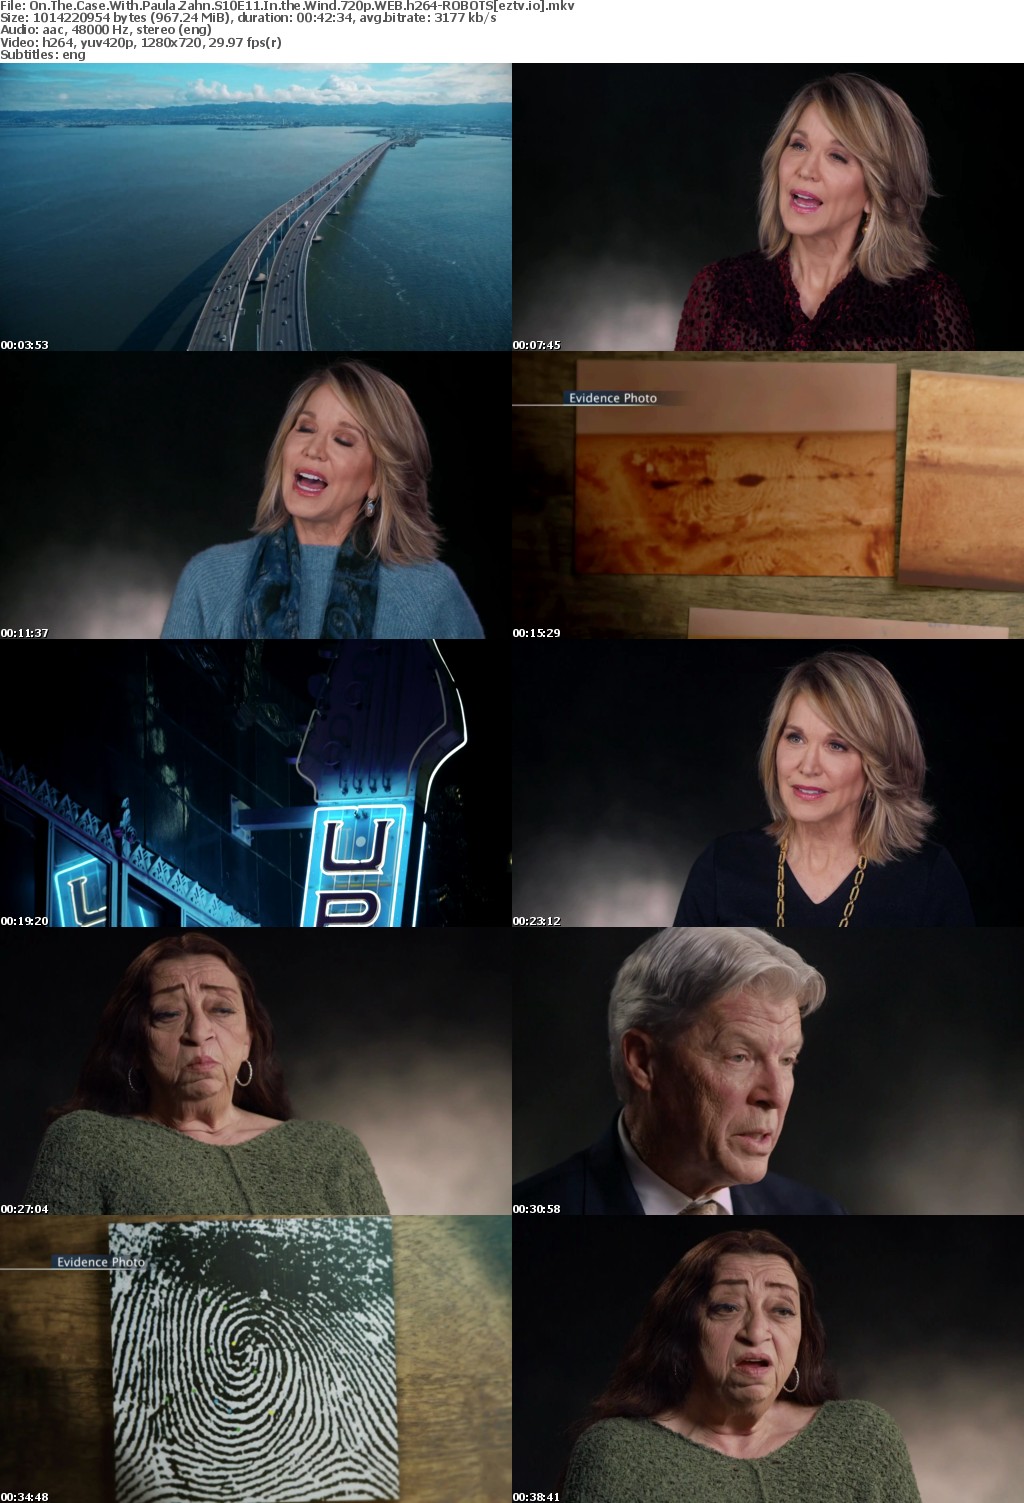 On The Case With Paula Zahn S10E11 In the Wind 720p WEB h264-ROBOTS